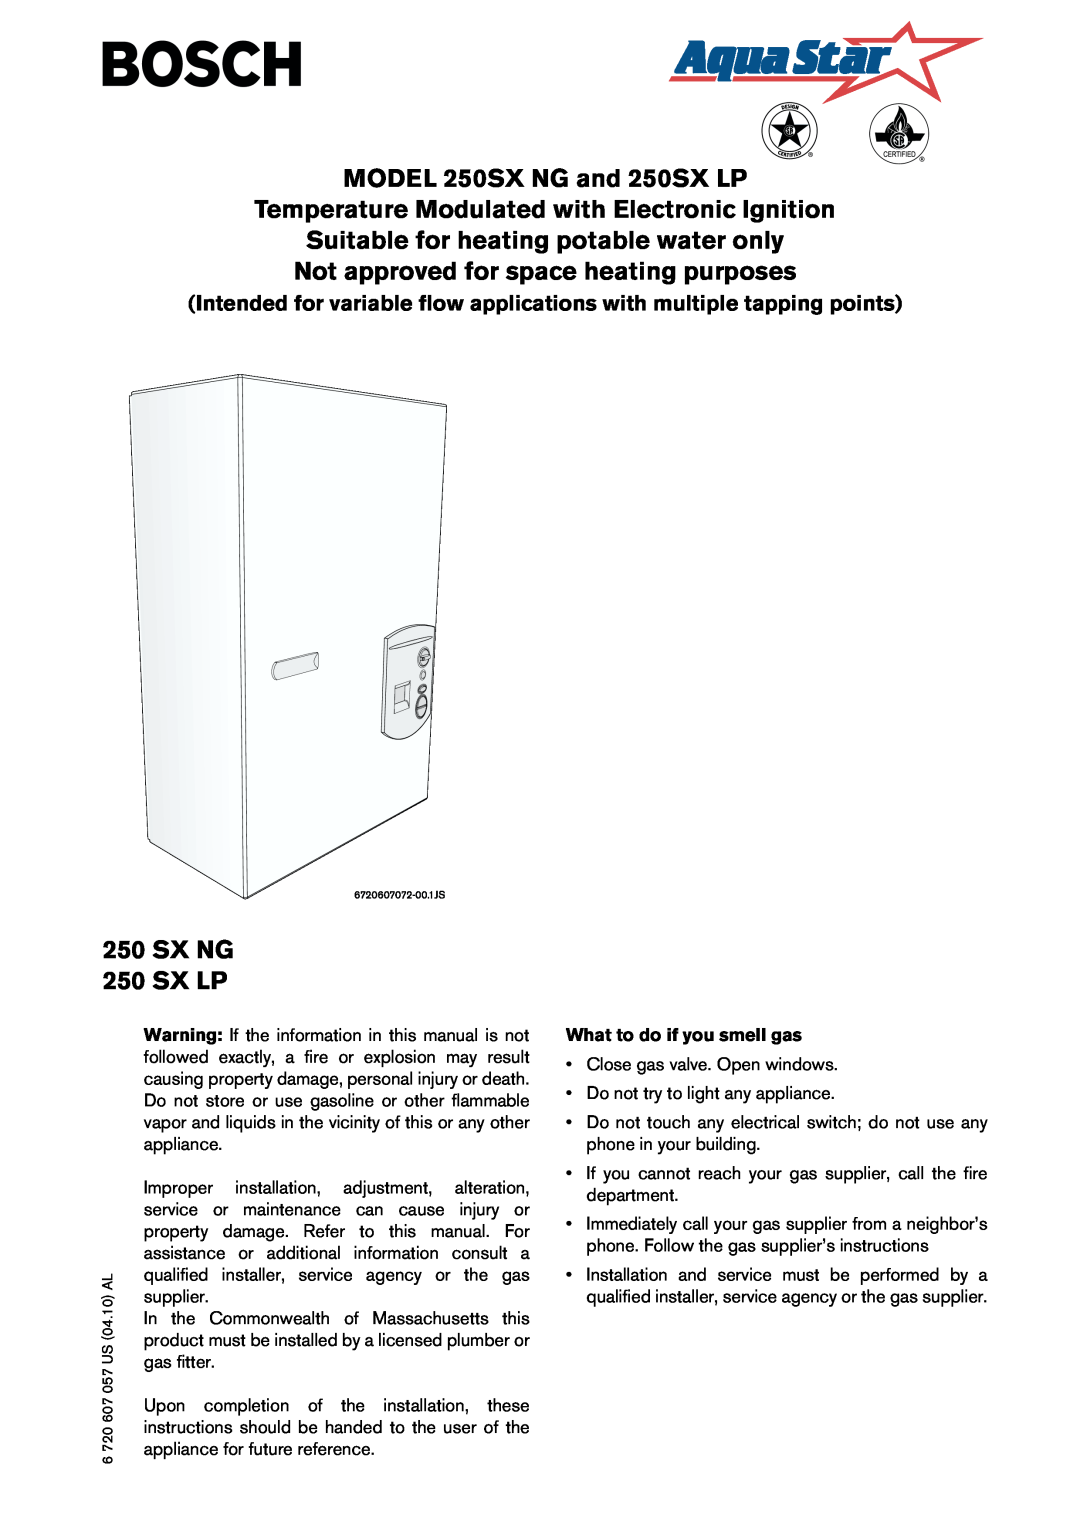 Bosch Appliances manual MODEL 250SX NG and 250SX LP, Temperature Modulated with Electronic Ignition, SX NG 250 SX LP 